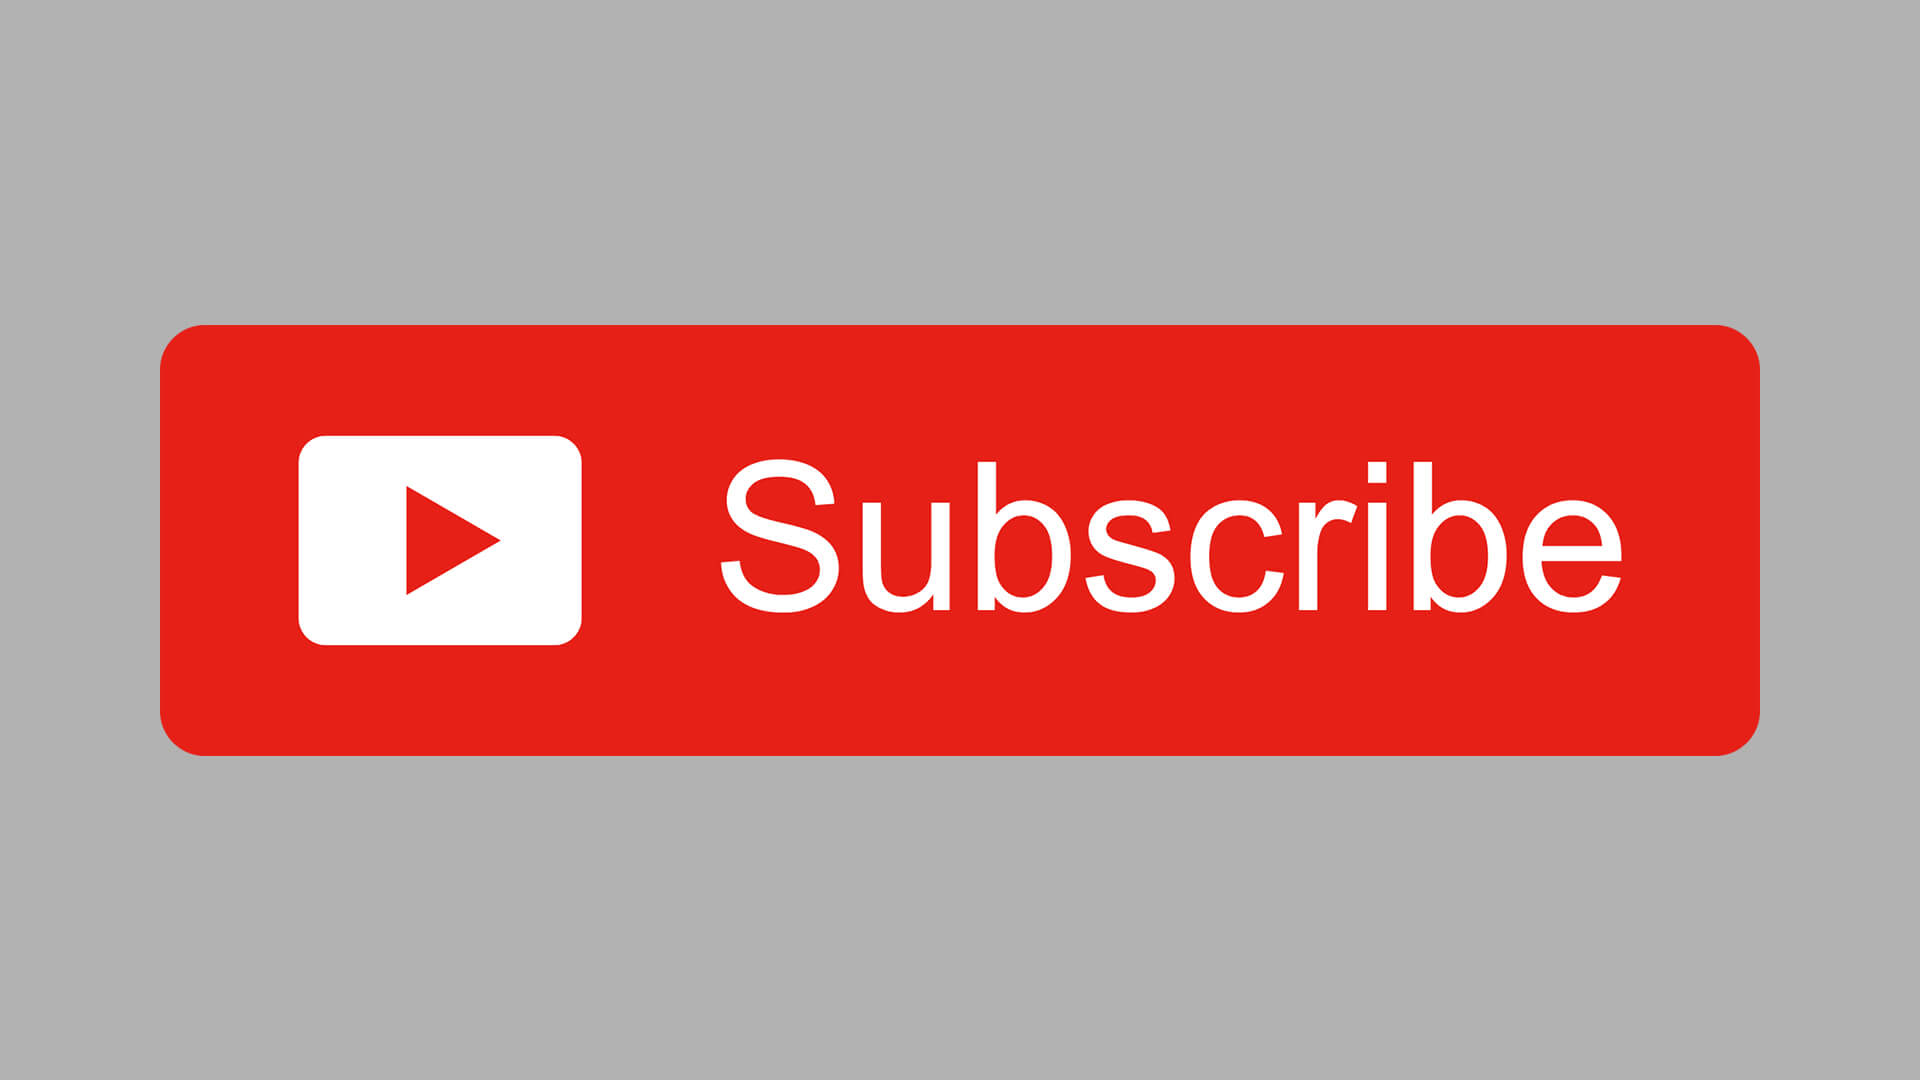 Free-YouTube-Subscribe-Button-Download-Design-Inspiration-By-AlfredoCreates-6